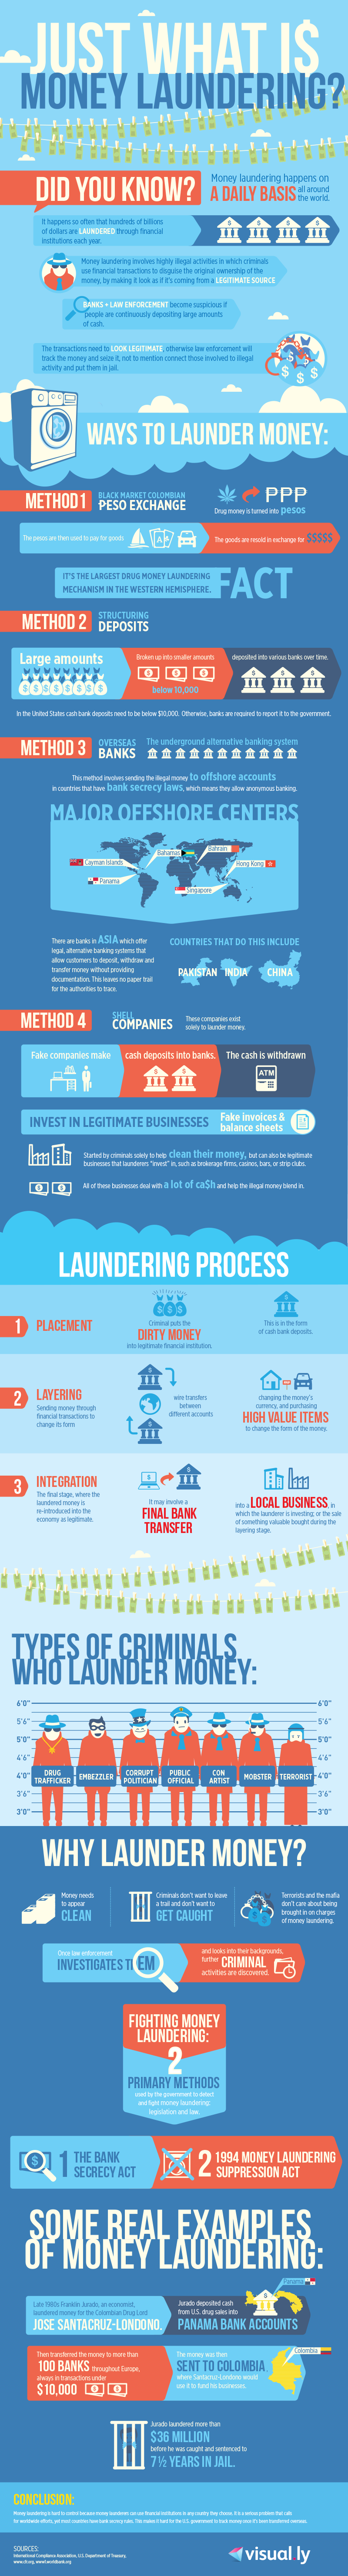 Just What Is Money Laundering?